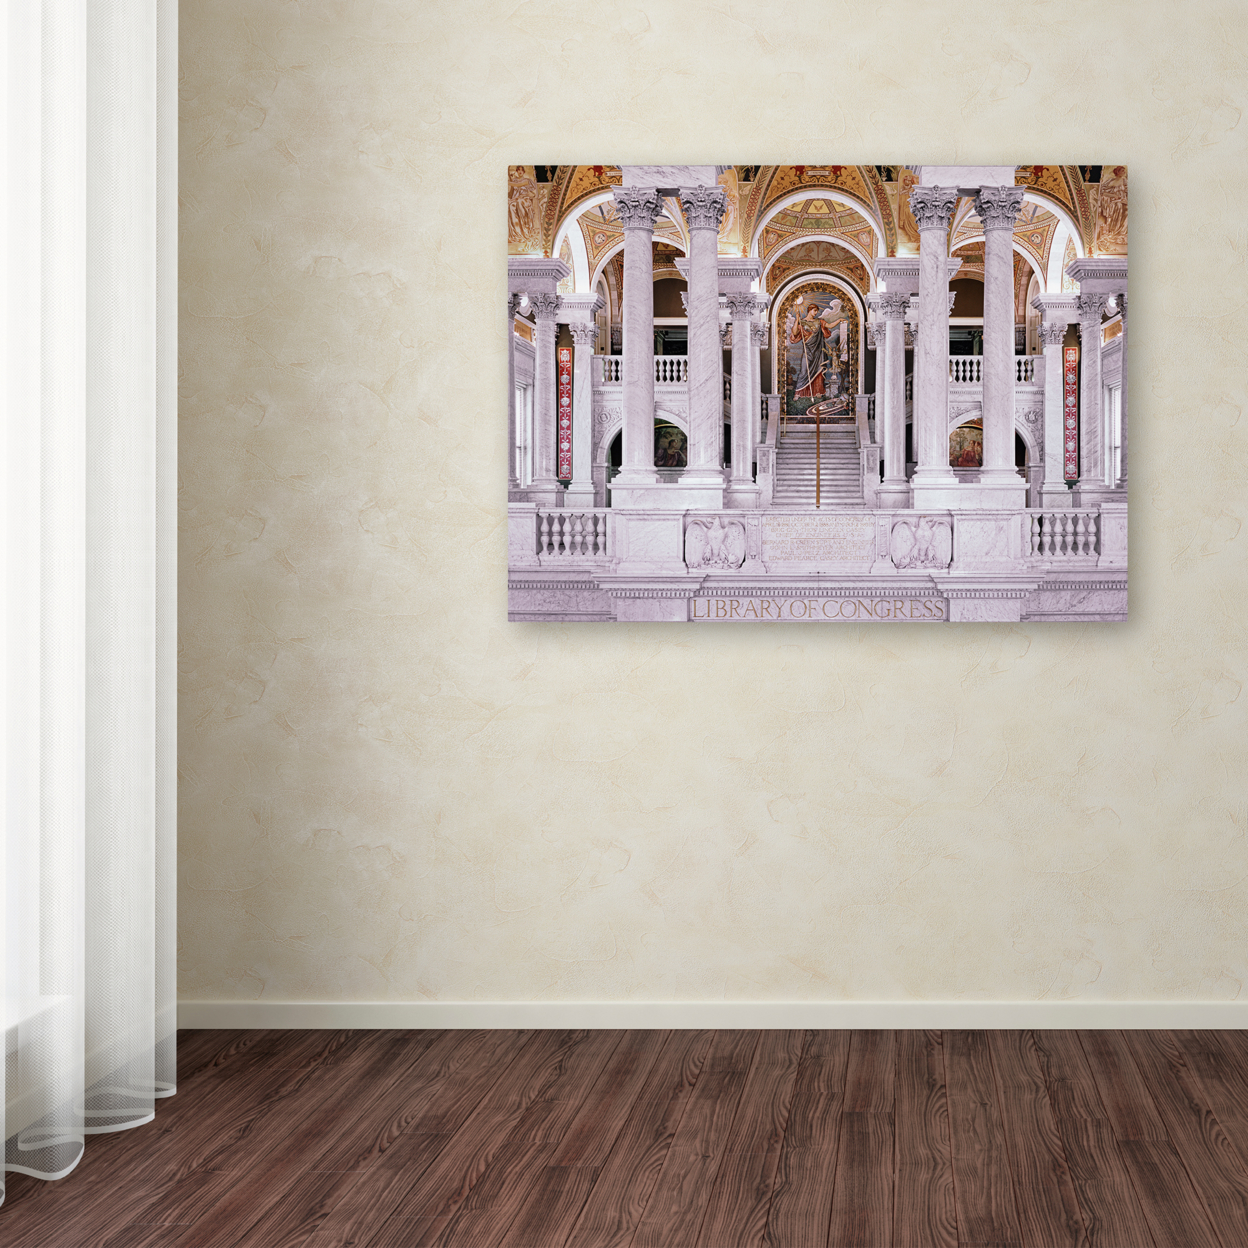 Gregory O'Hanlon 'Library Of Congress' Canvas Wall Art 35 X 47 Inches